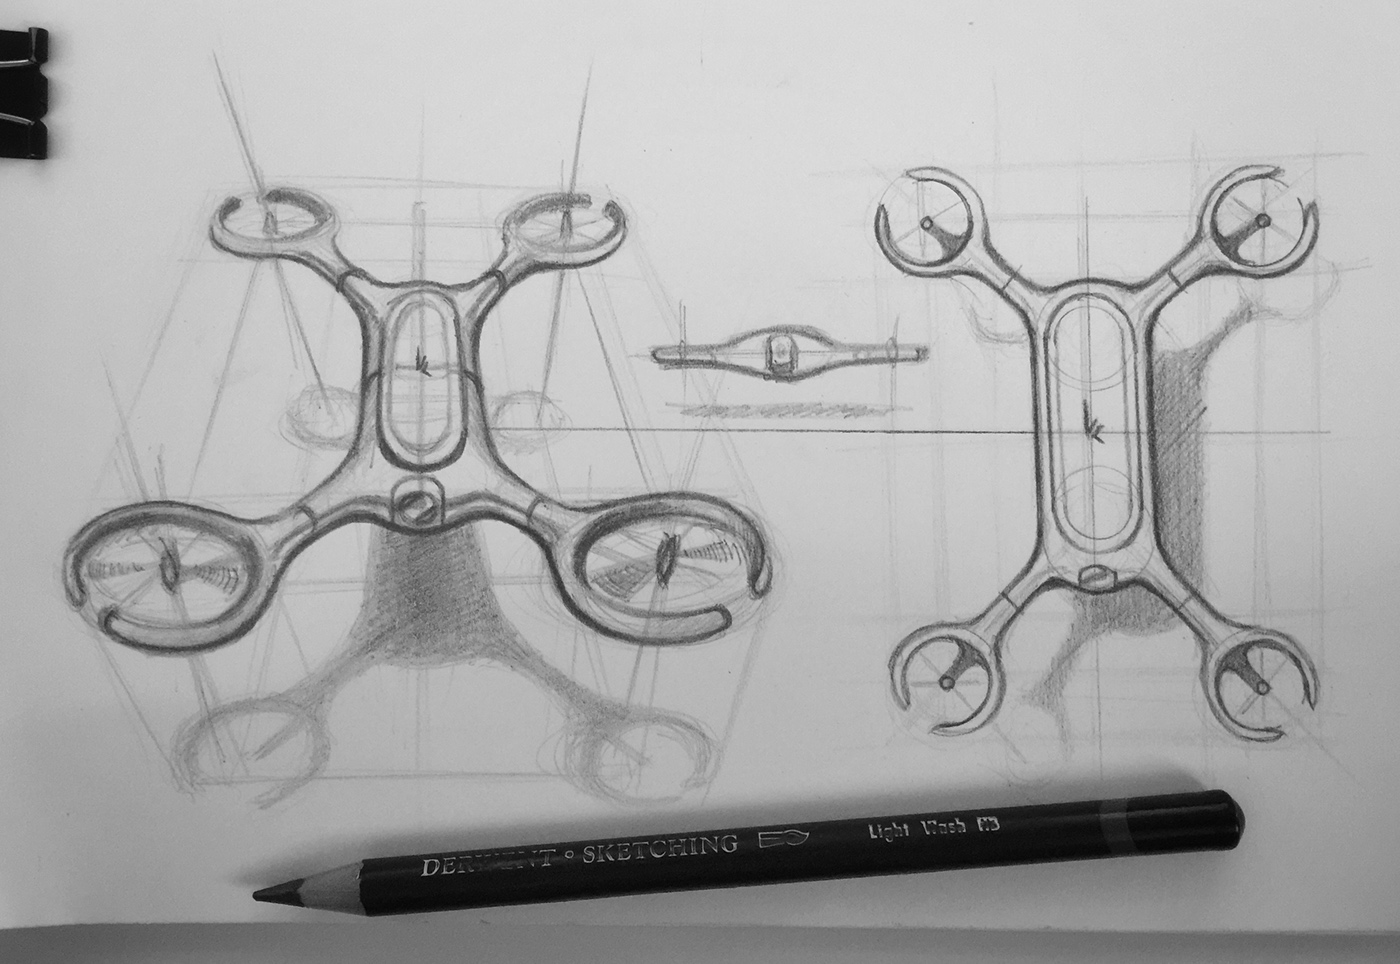 sketch sketching idsketching handsketching pen paper Render shoes spaceships axe